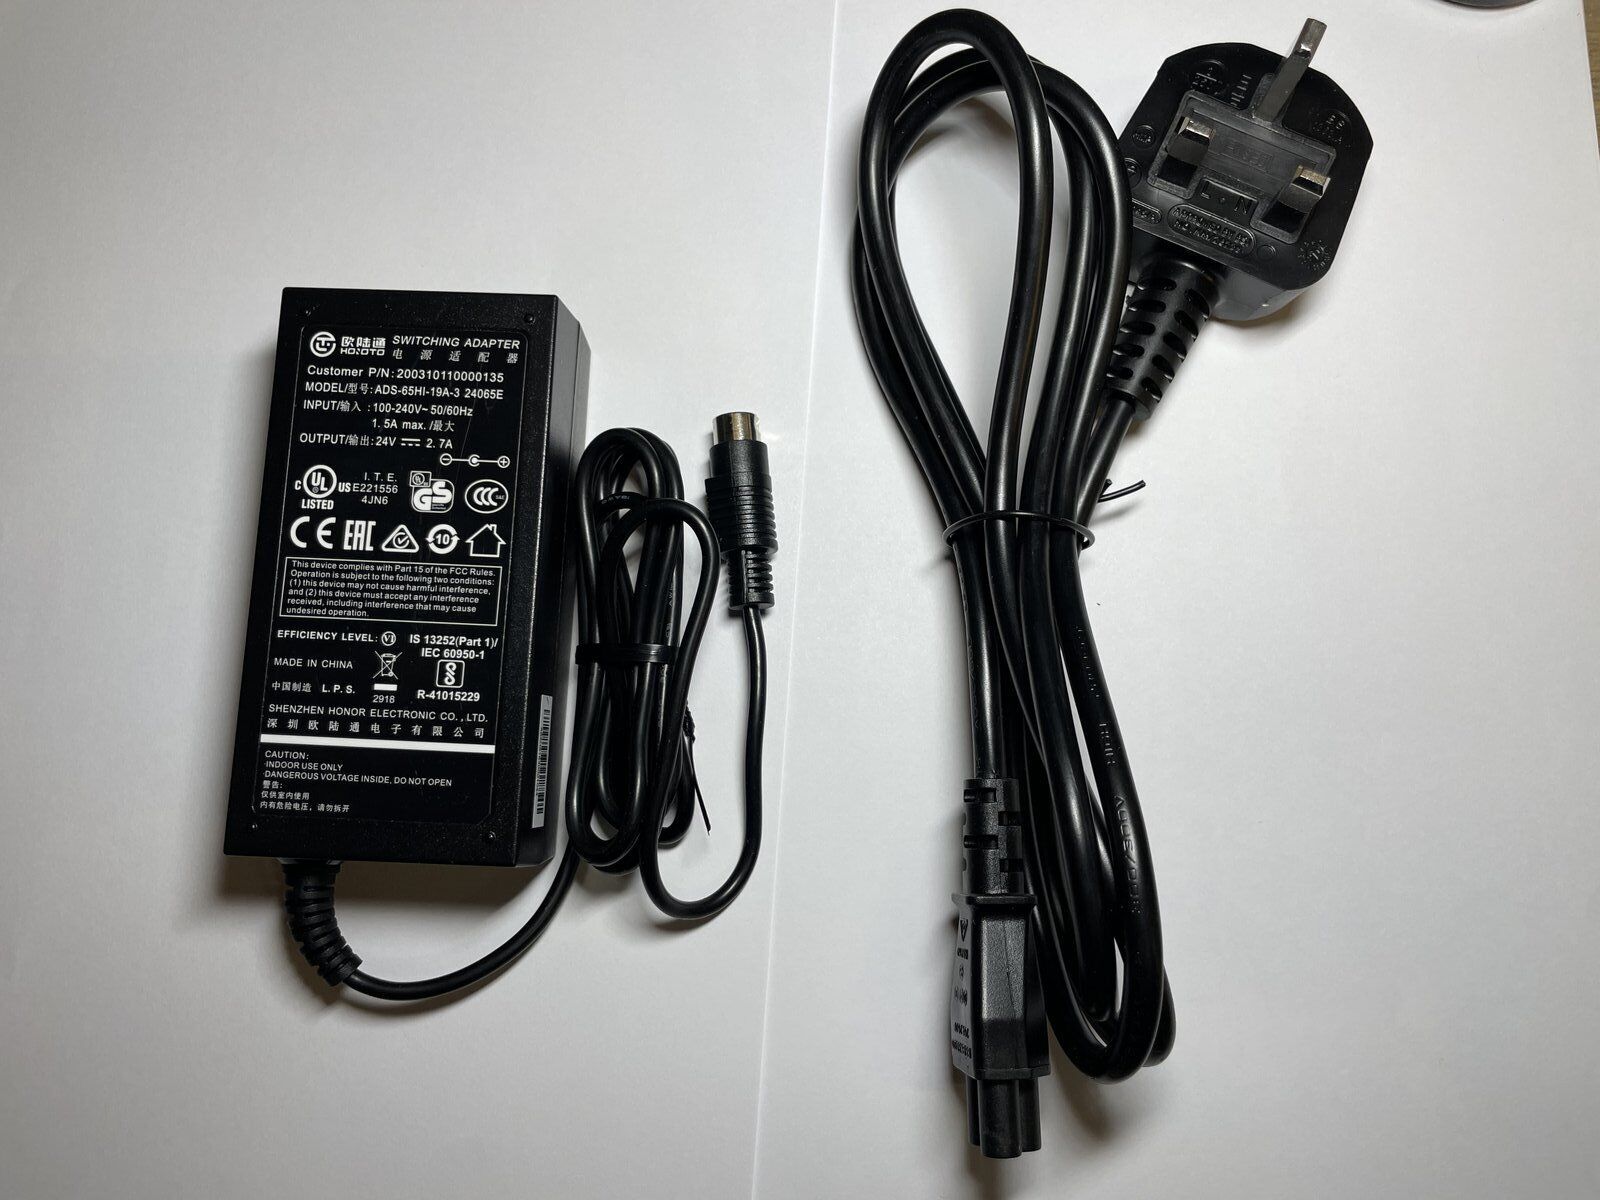 Replacement for 24V 2.15A DA-52B24 PS60A-24C PS60A-24B AC Adapter for Star SP298 Bundled Items Power Cable EAN 50594243 - Click Image to Close